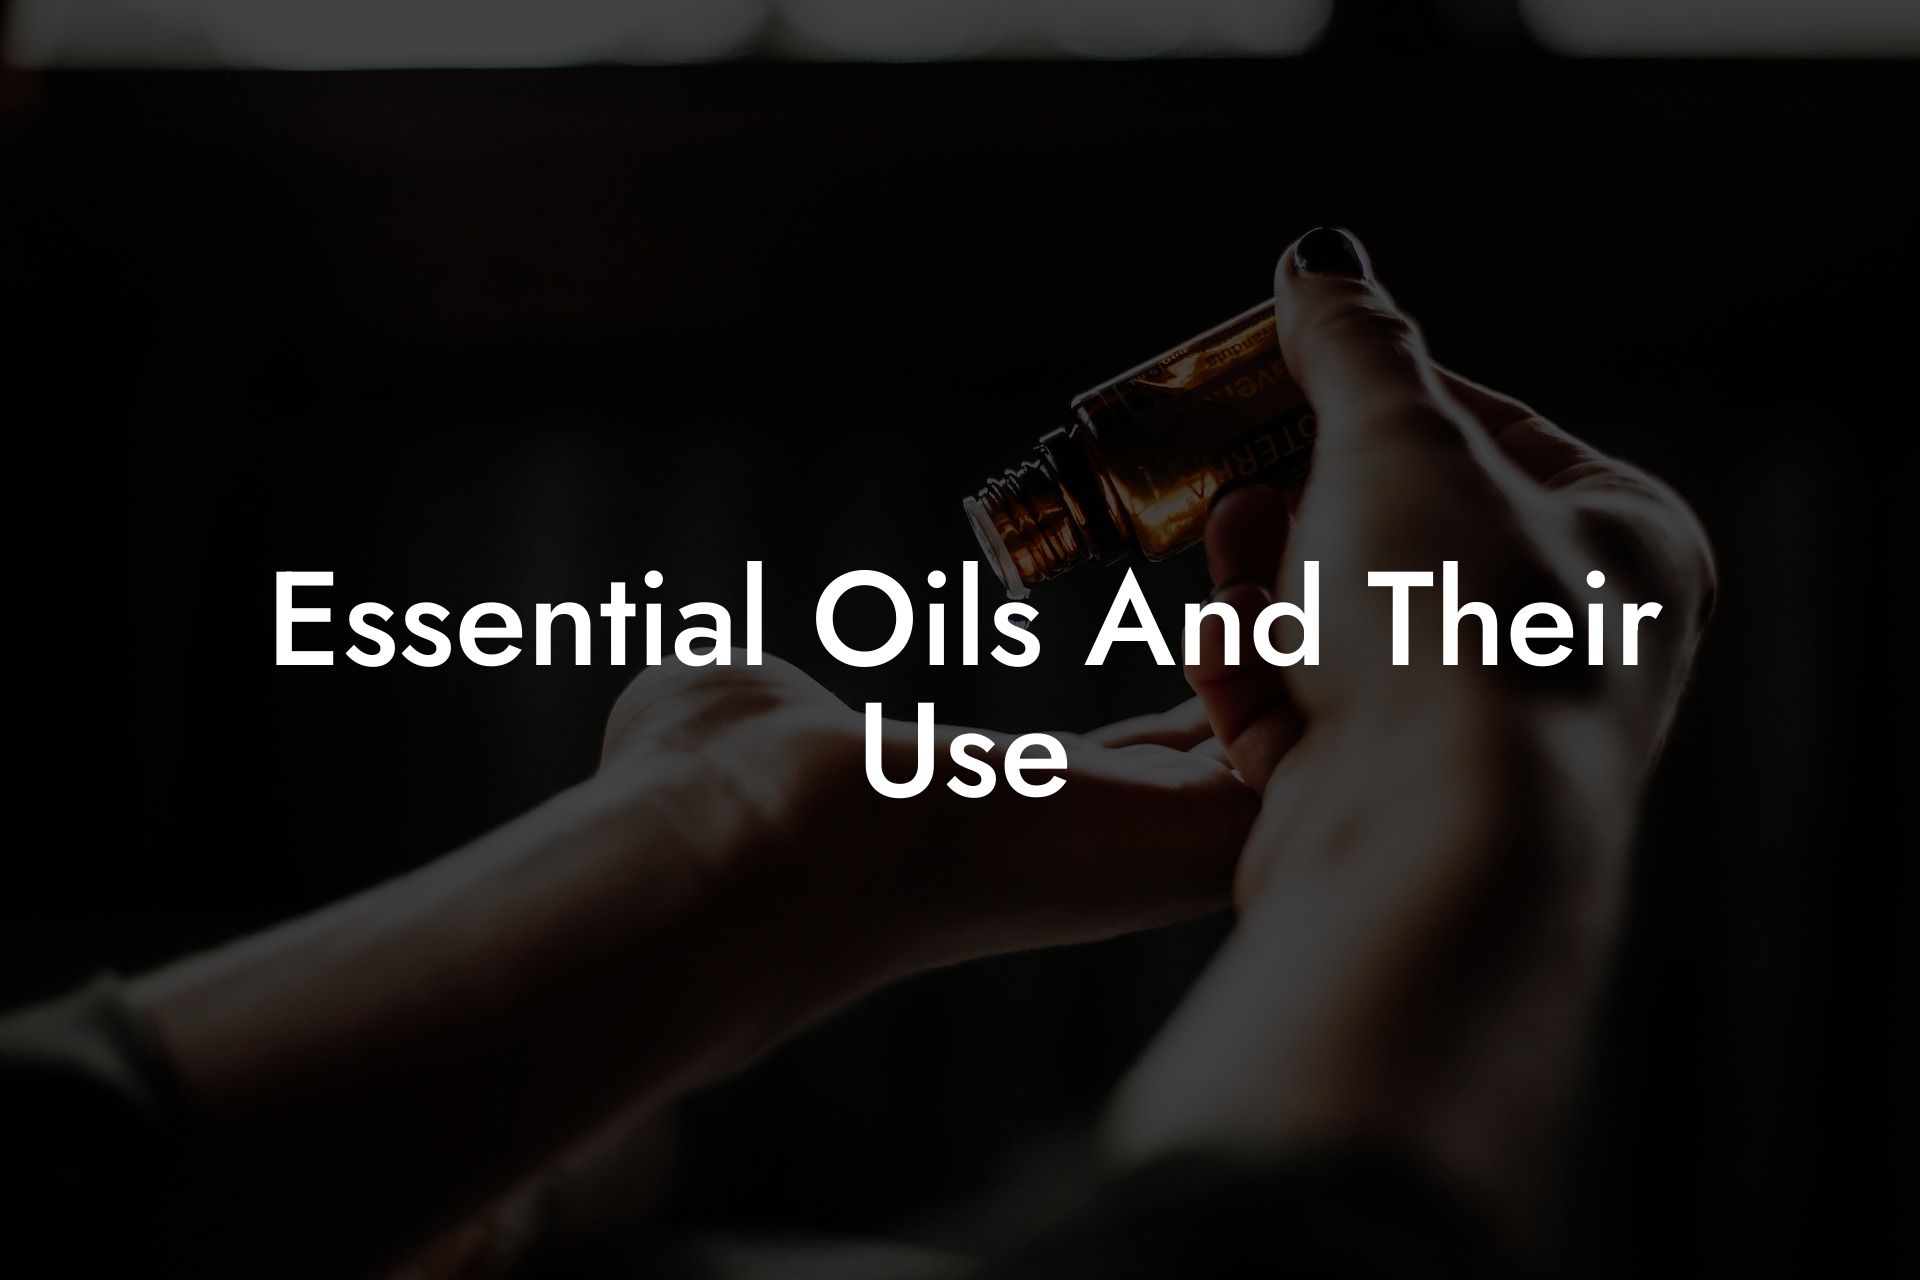 Essential Oils And Their Use